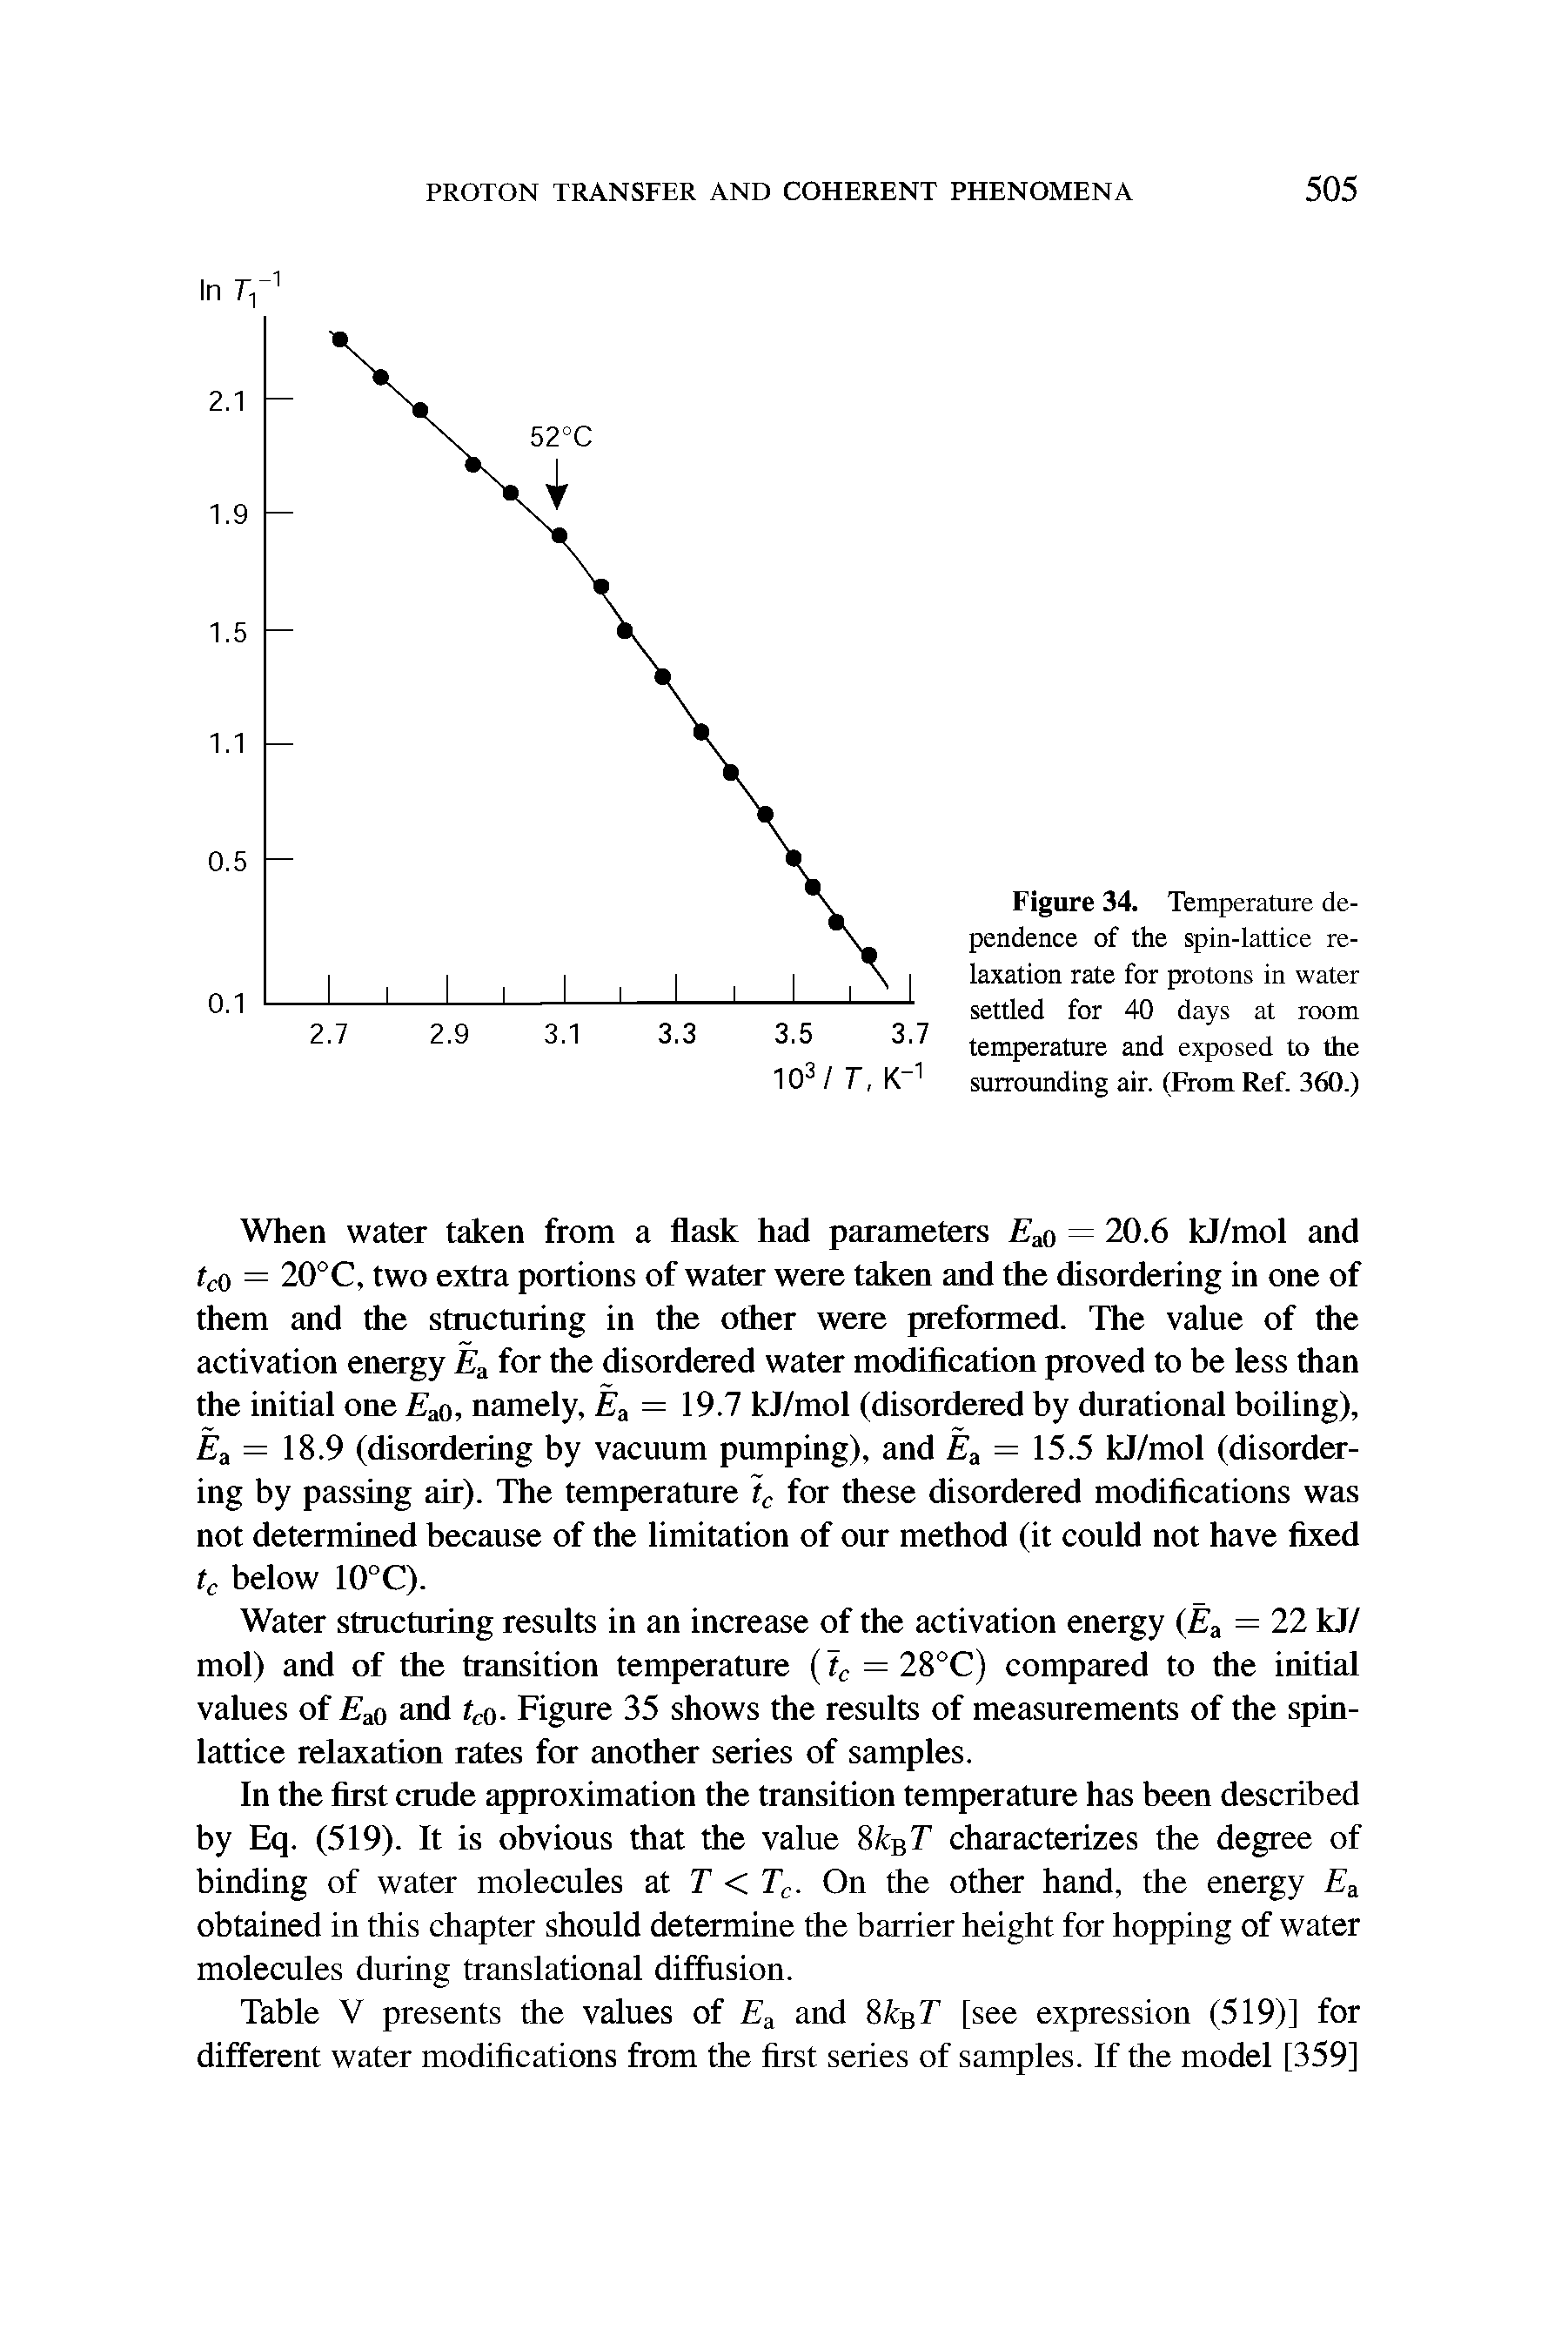 Figure 34. Temperature dependence of the spin-lattice relaxation rate for protons in water settled for 40 days at room temperature and exposed to the surrounding air. (From Ref. 360.)...